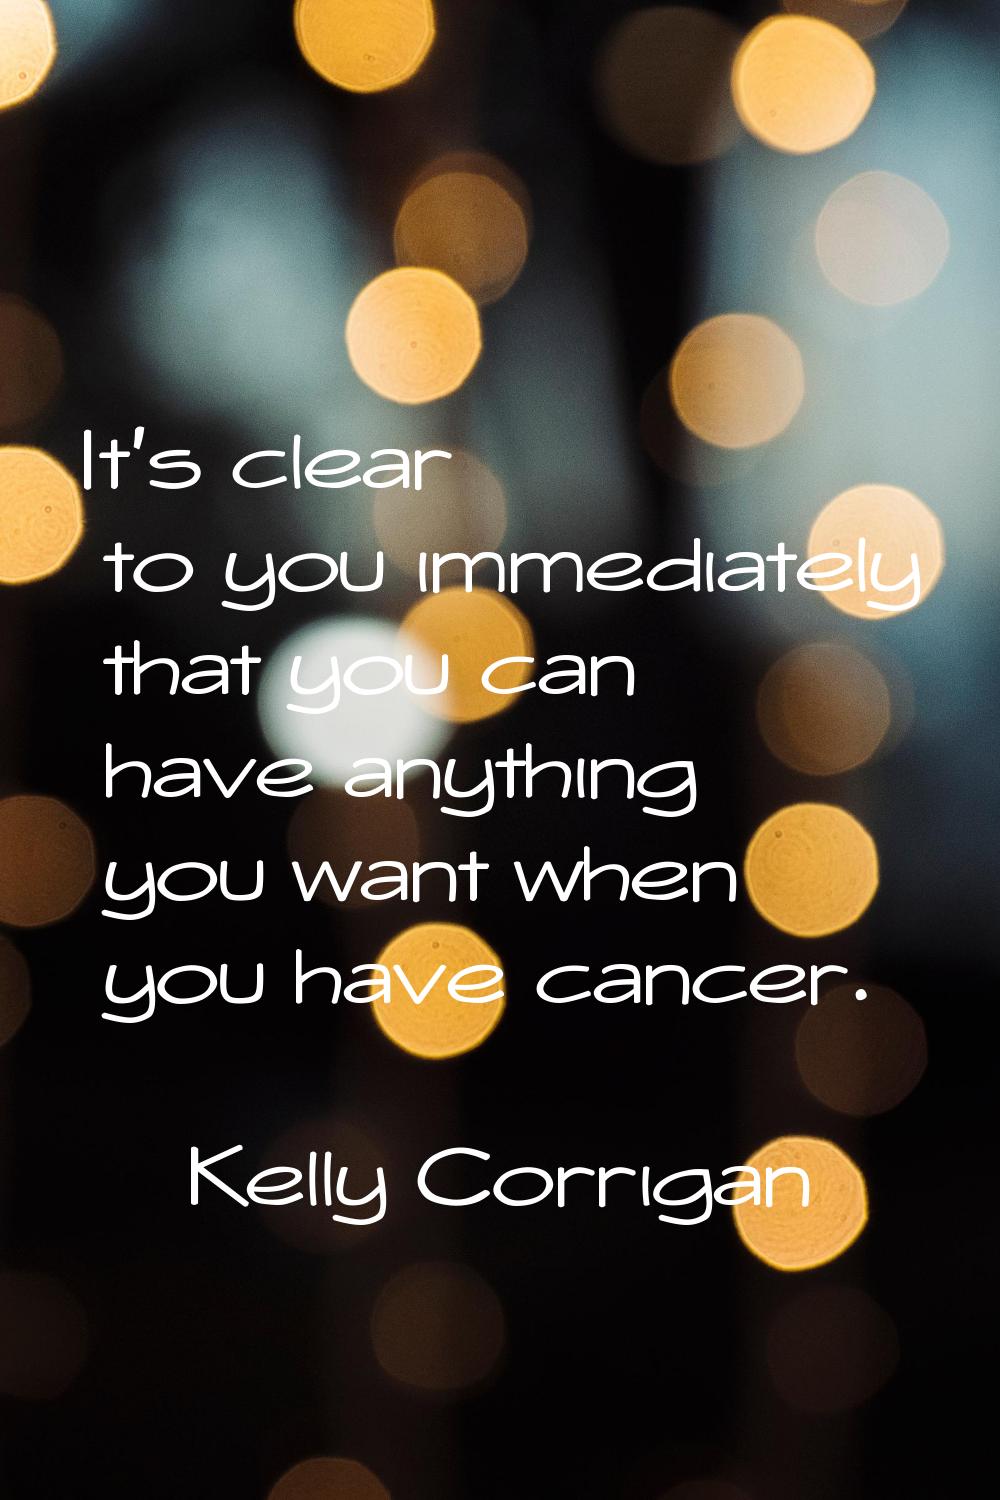 It's clear to you immediately that you can have anything you want when you have cancer.